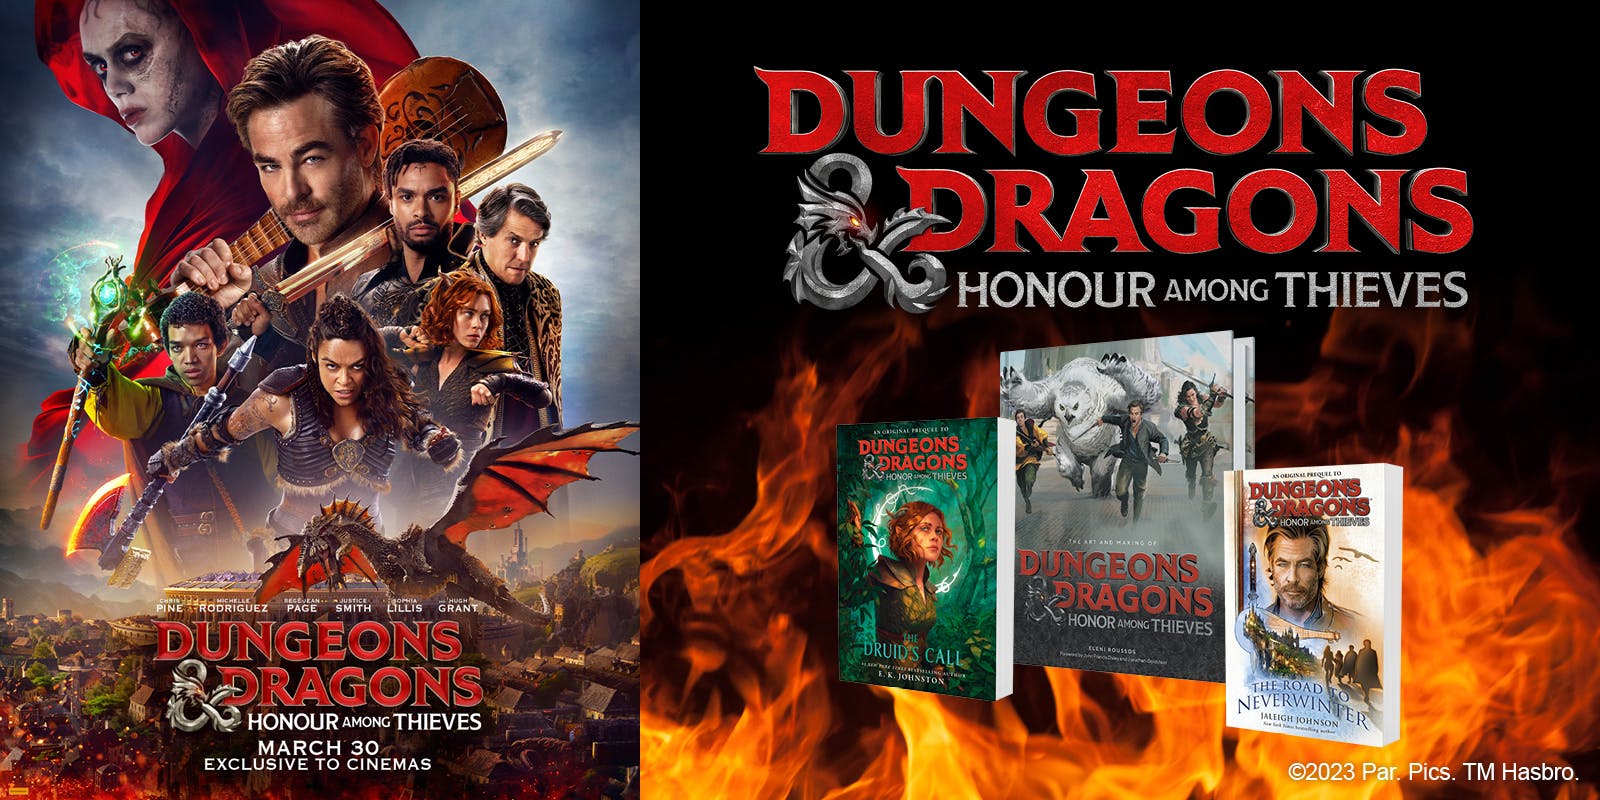 What to read before watching 'Dungeons & Dragons Honour Among Thieves